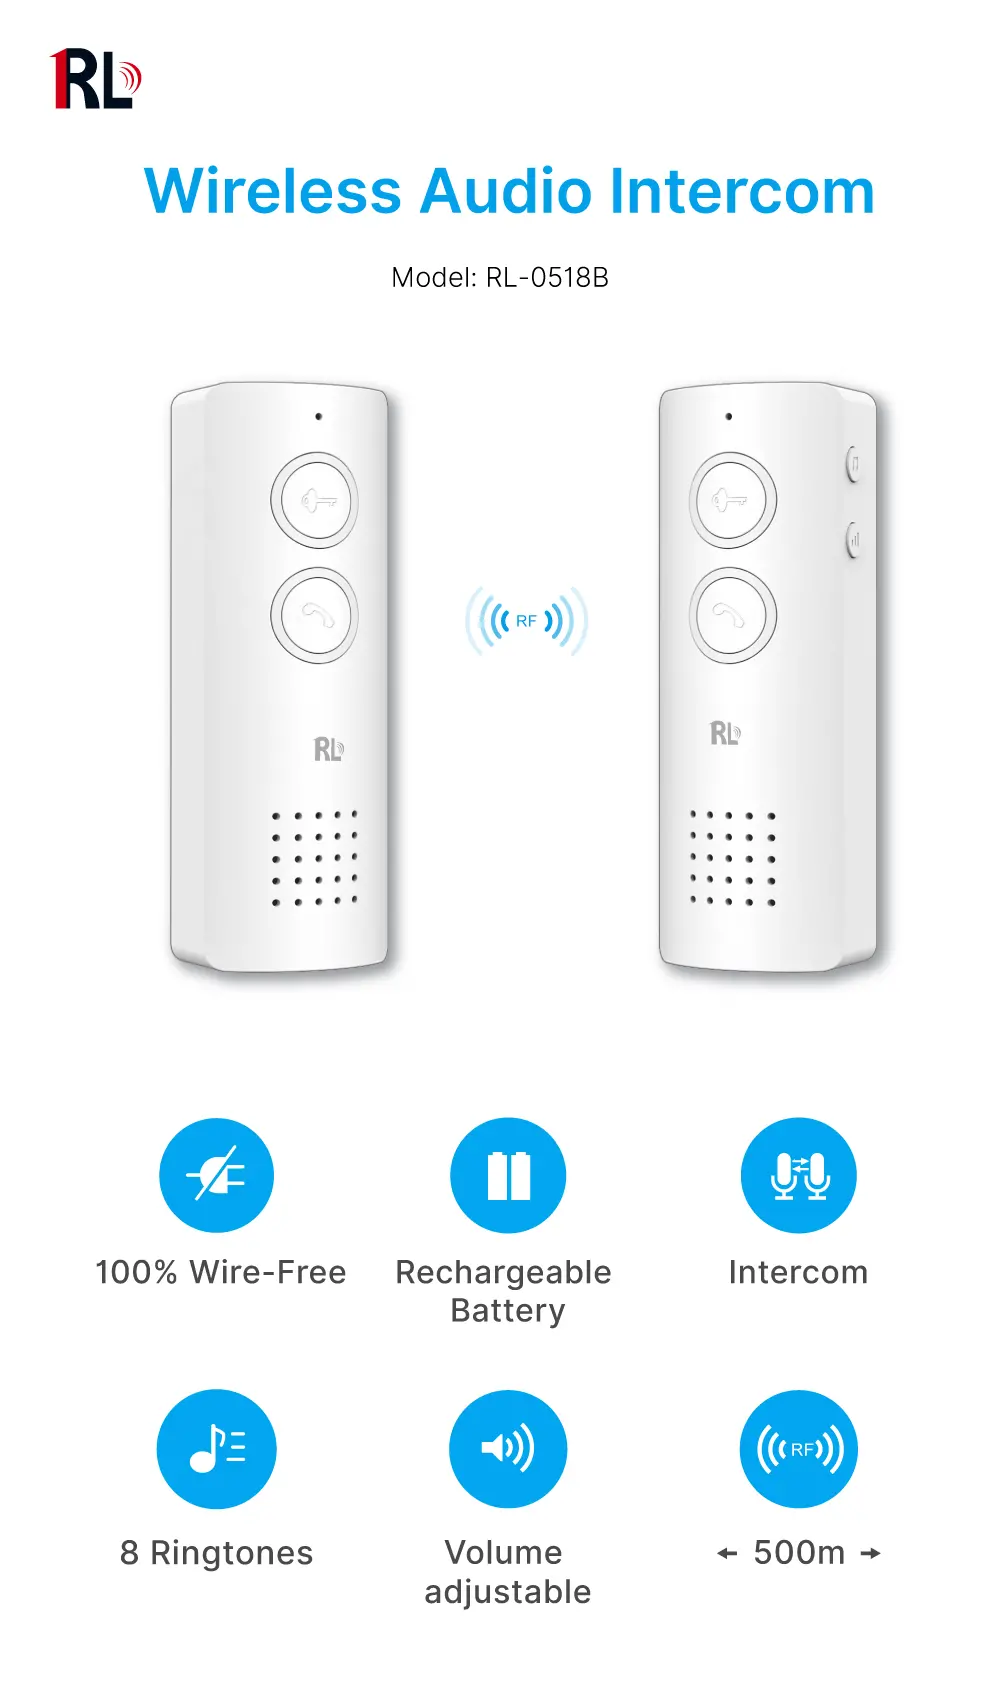 Wireless Audio Intercom #RL-0518B - Wireless duplex communication, - 8 ringtones for option - Indicator lights for low battery status and battery charging status.- Up to 500m distance _01